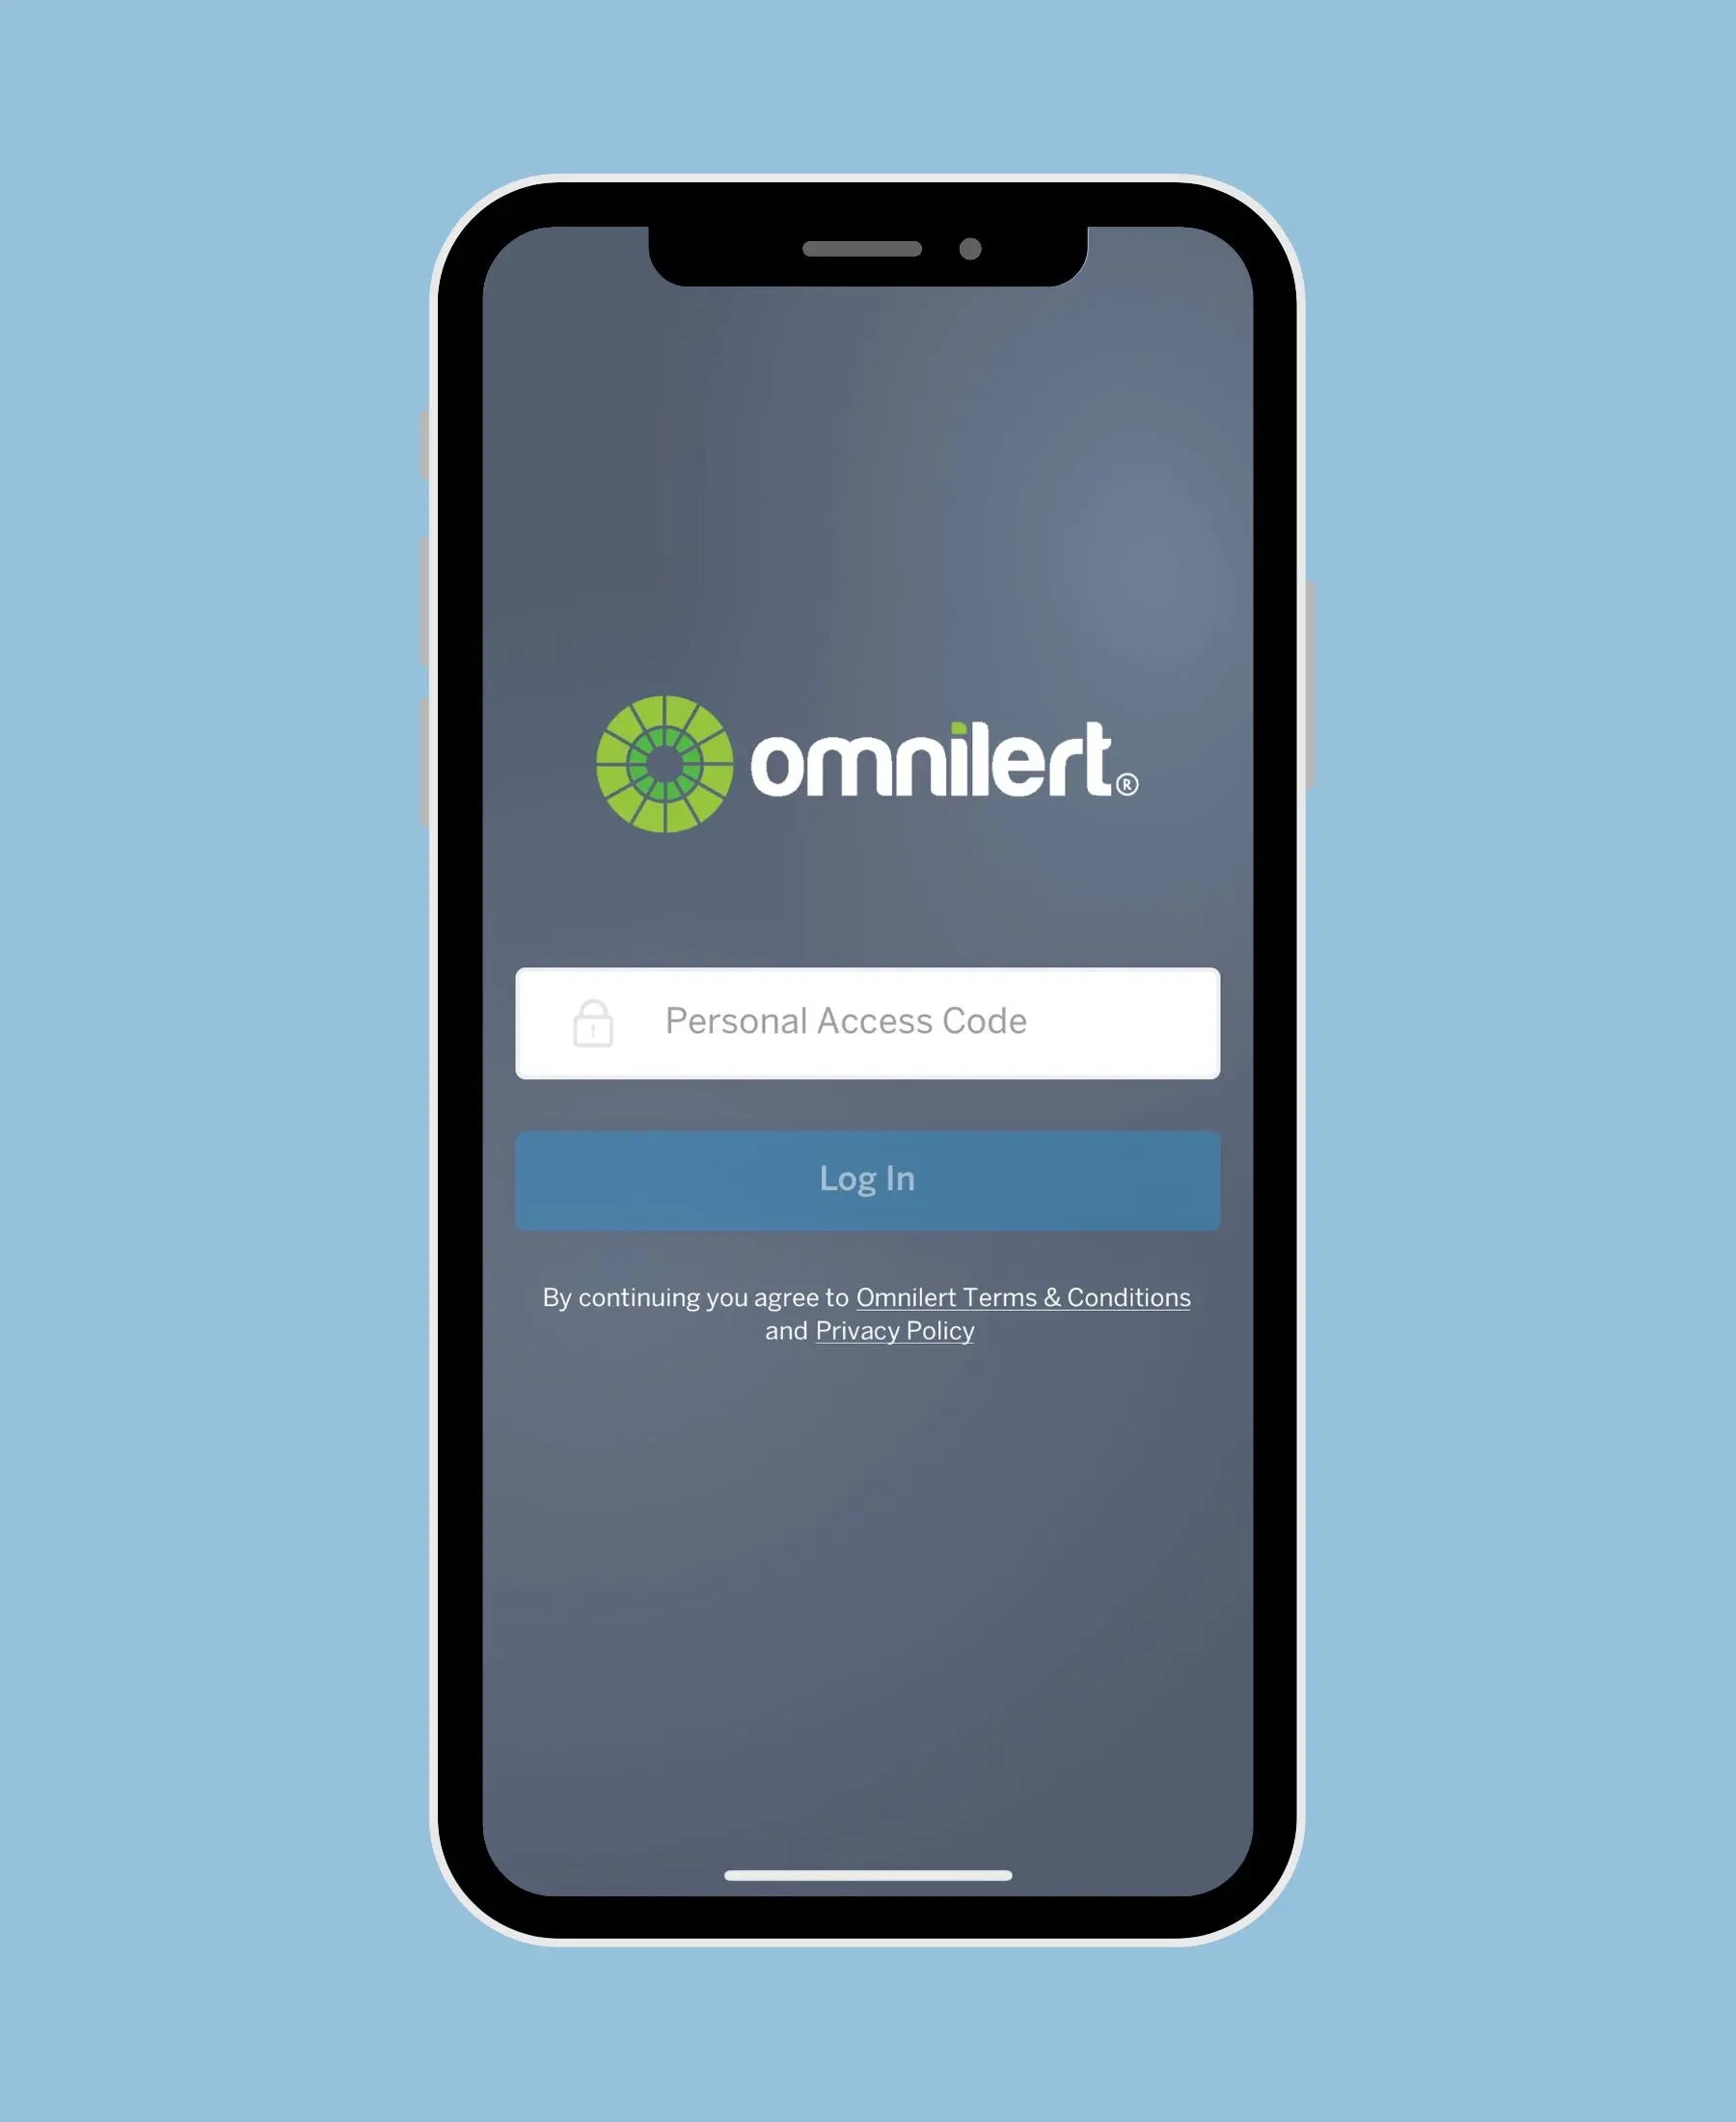 Phone screen showing Omnilert app sign in page